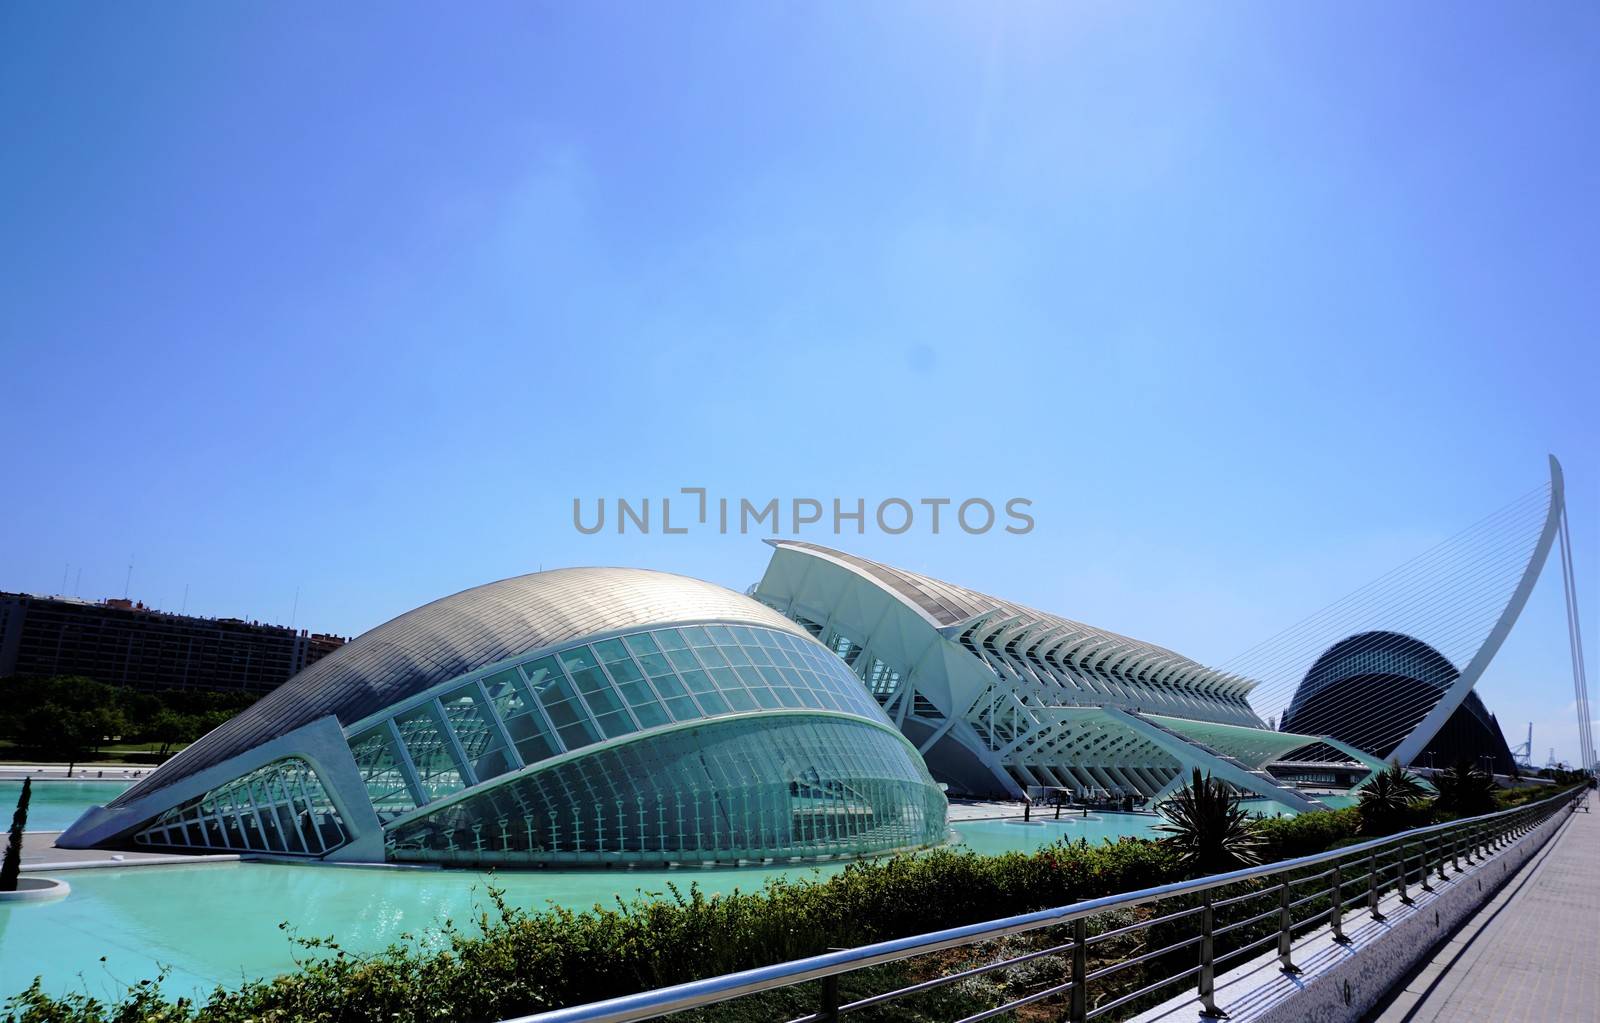 City of Arts and Sciences, Valencia by pisces2386